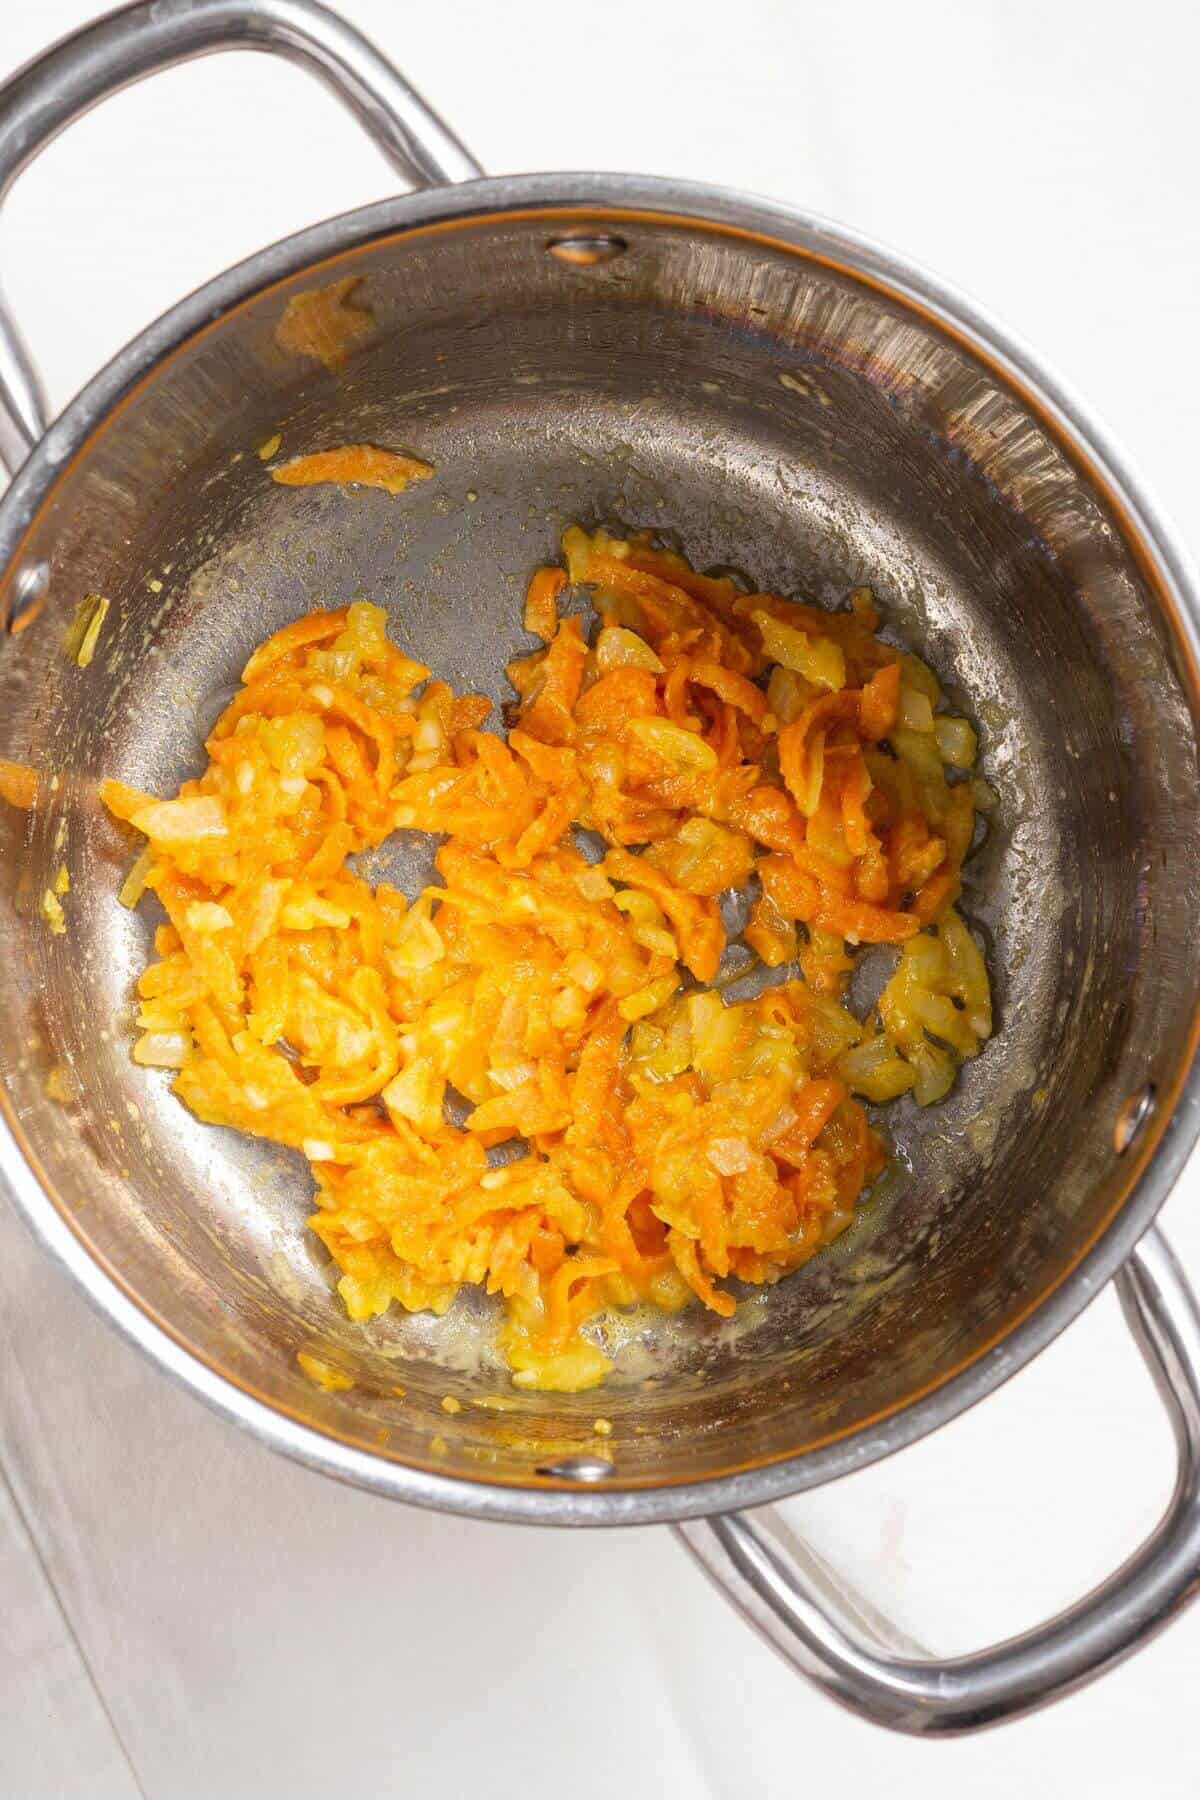 Cooked carrot and onion mixture in pot.